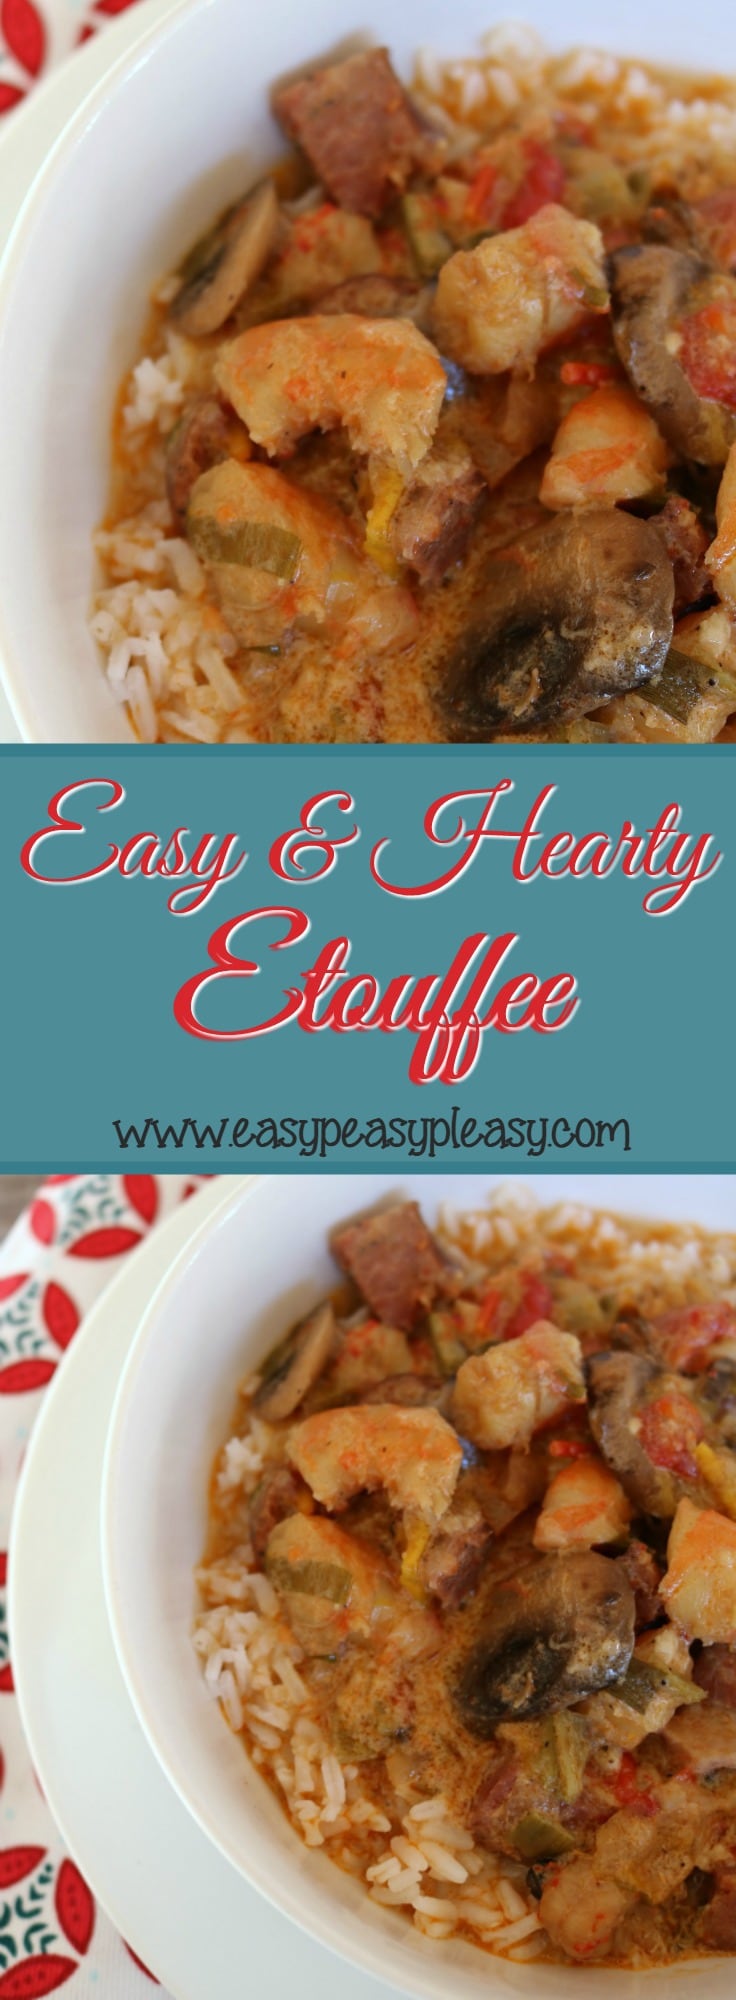 Easy and Hearty Etouffee made easy using simple ingredients!